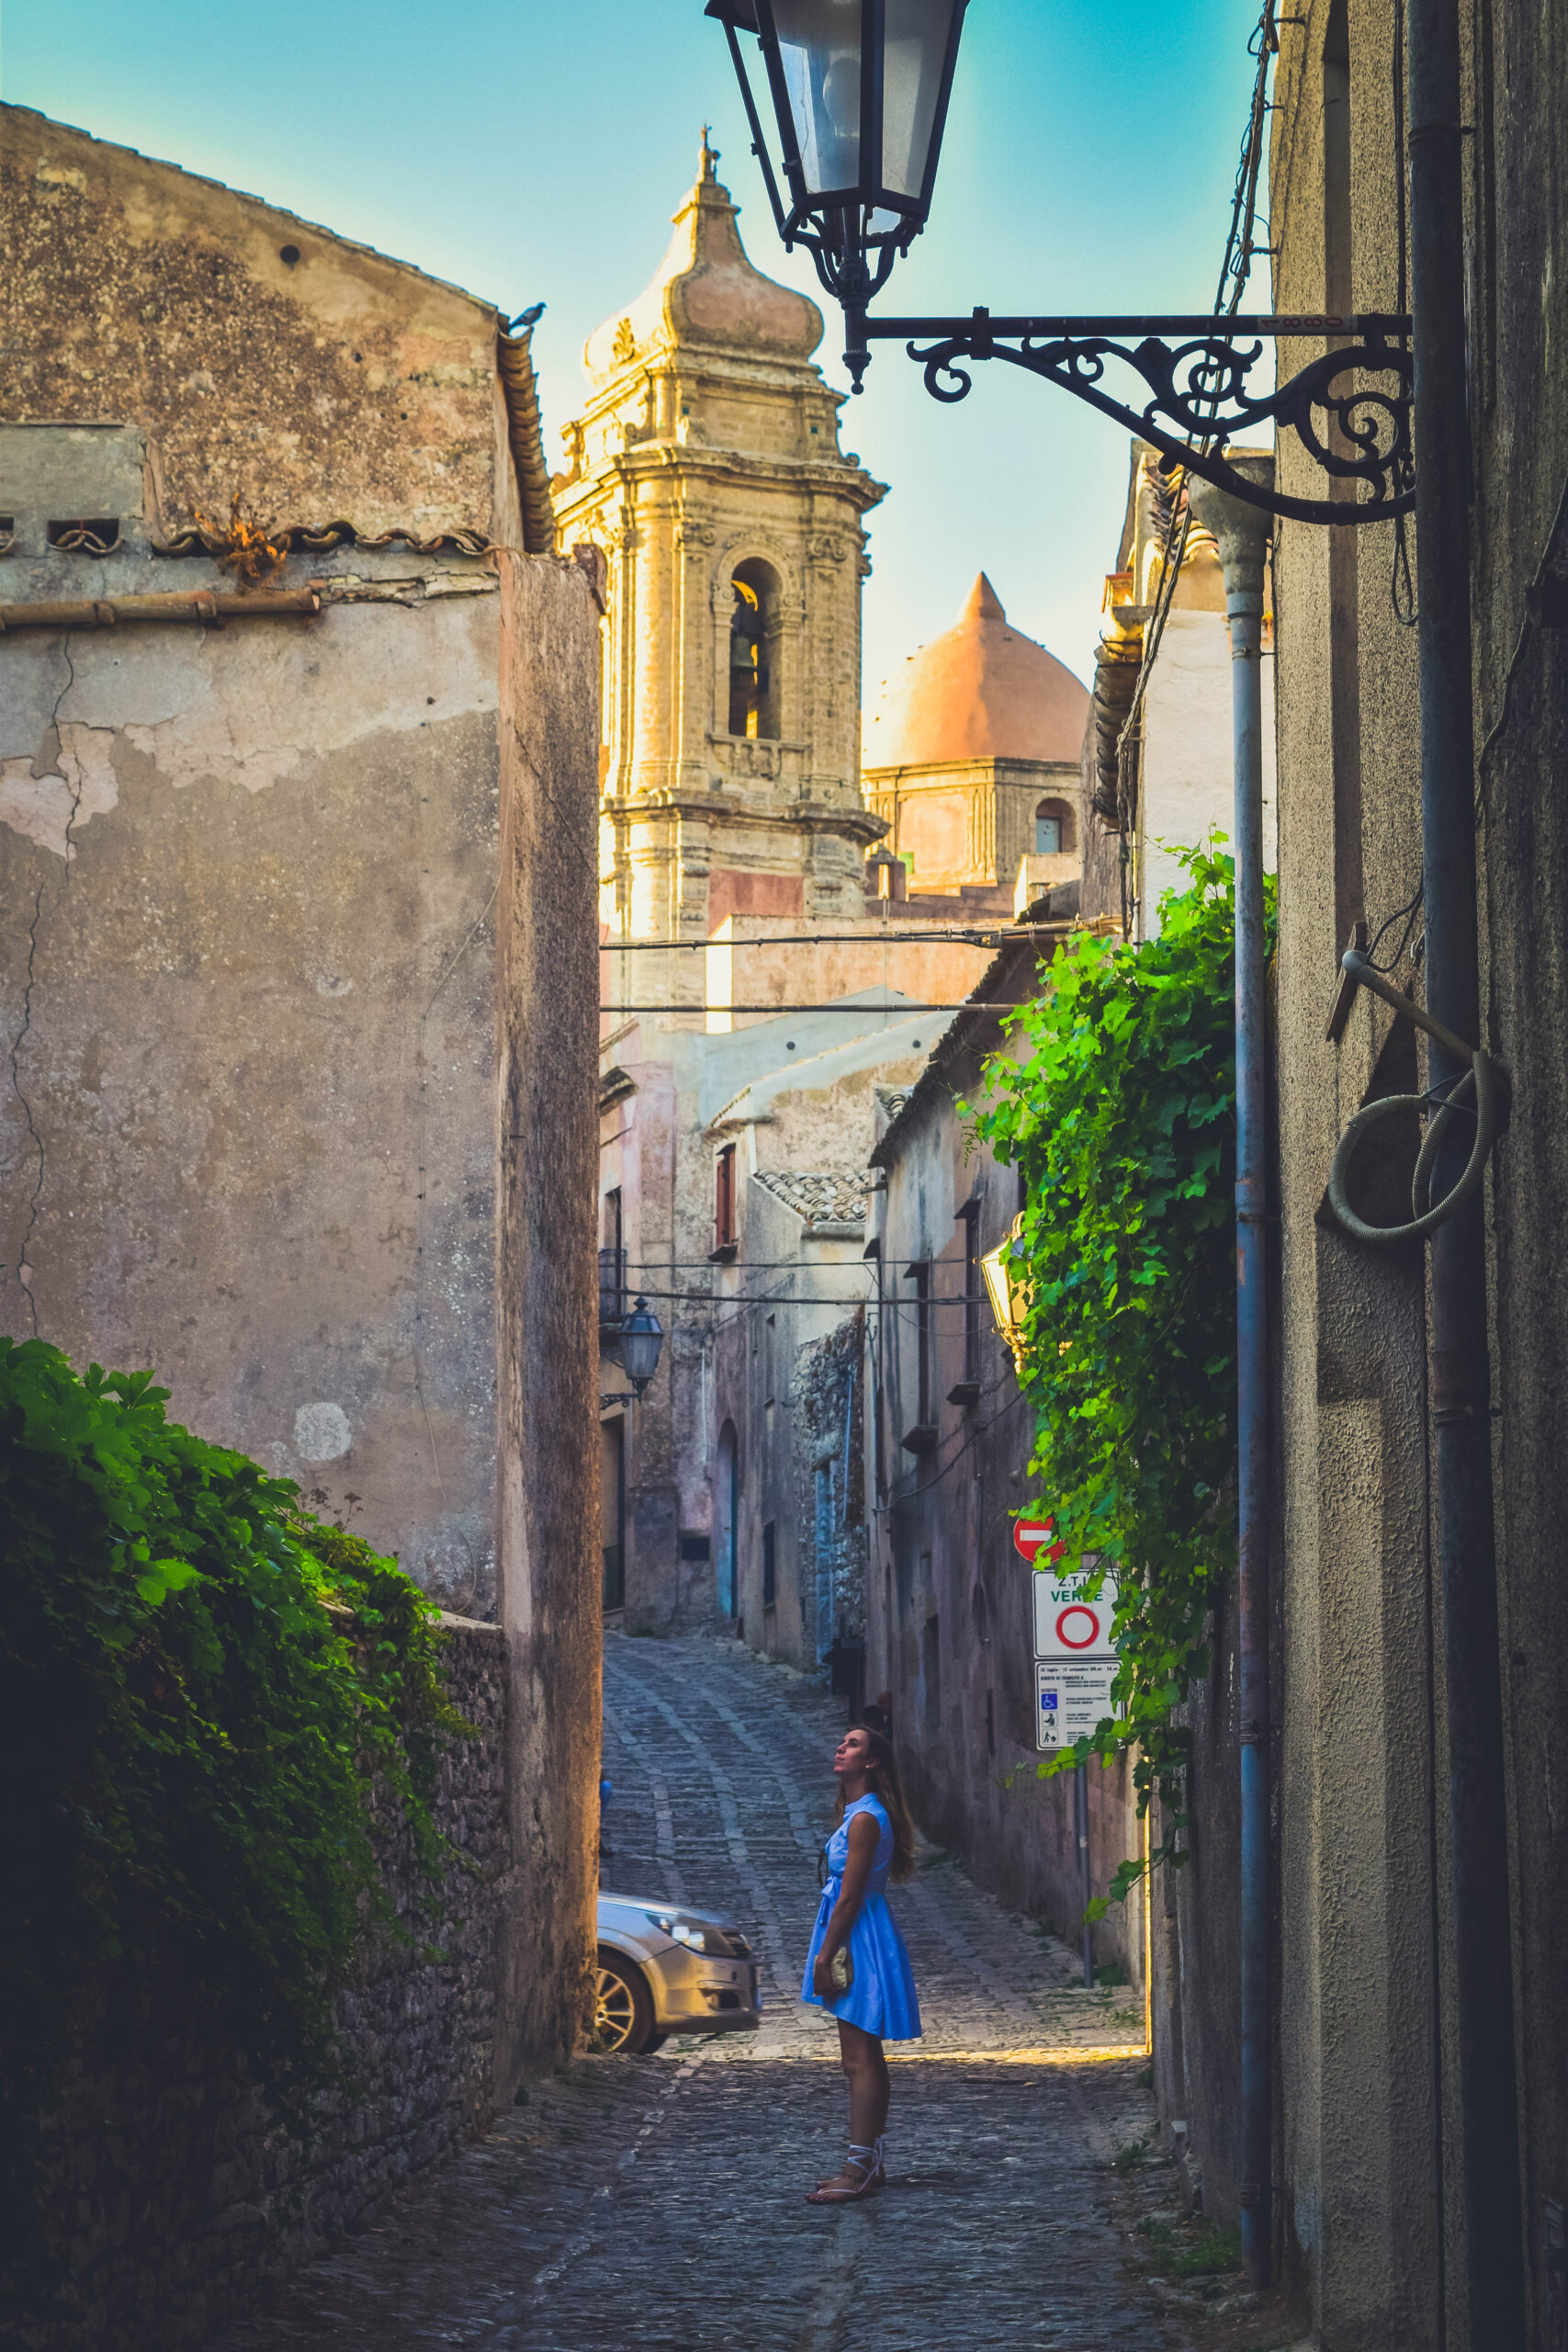 Erice_Where to go in sicily_what to do in erice_sicily_medieval town_city of 100 churches_castle_maria grammatico_food_travel guide_medieval city